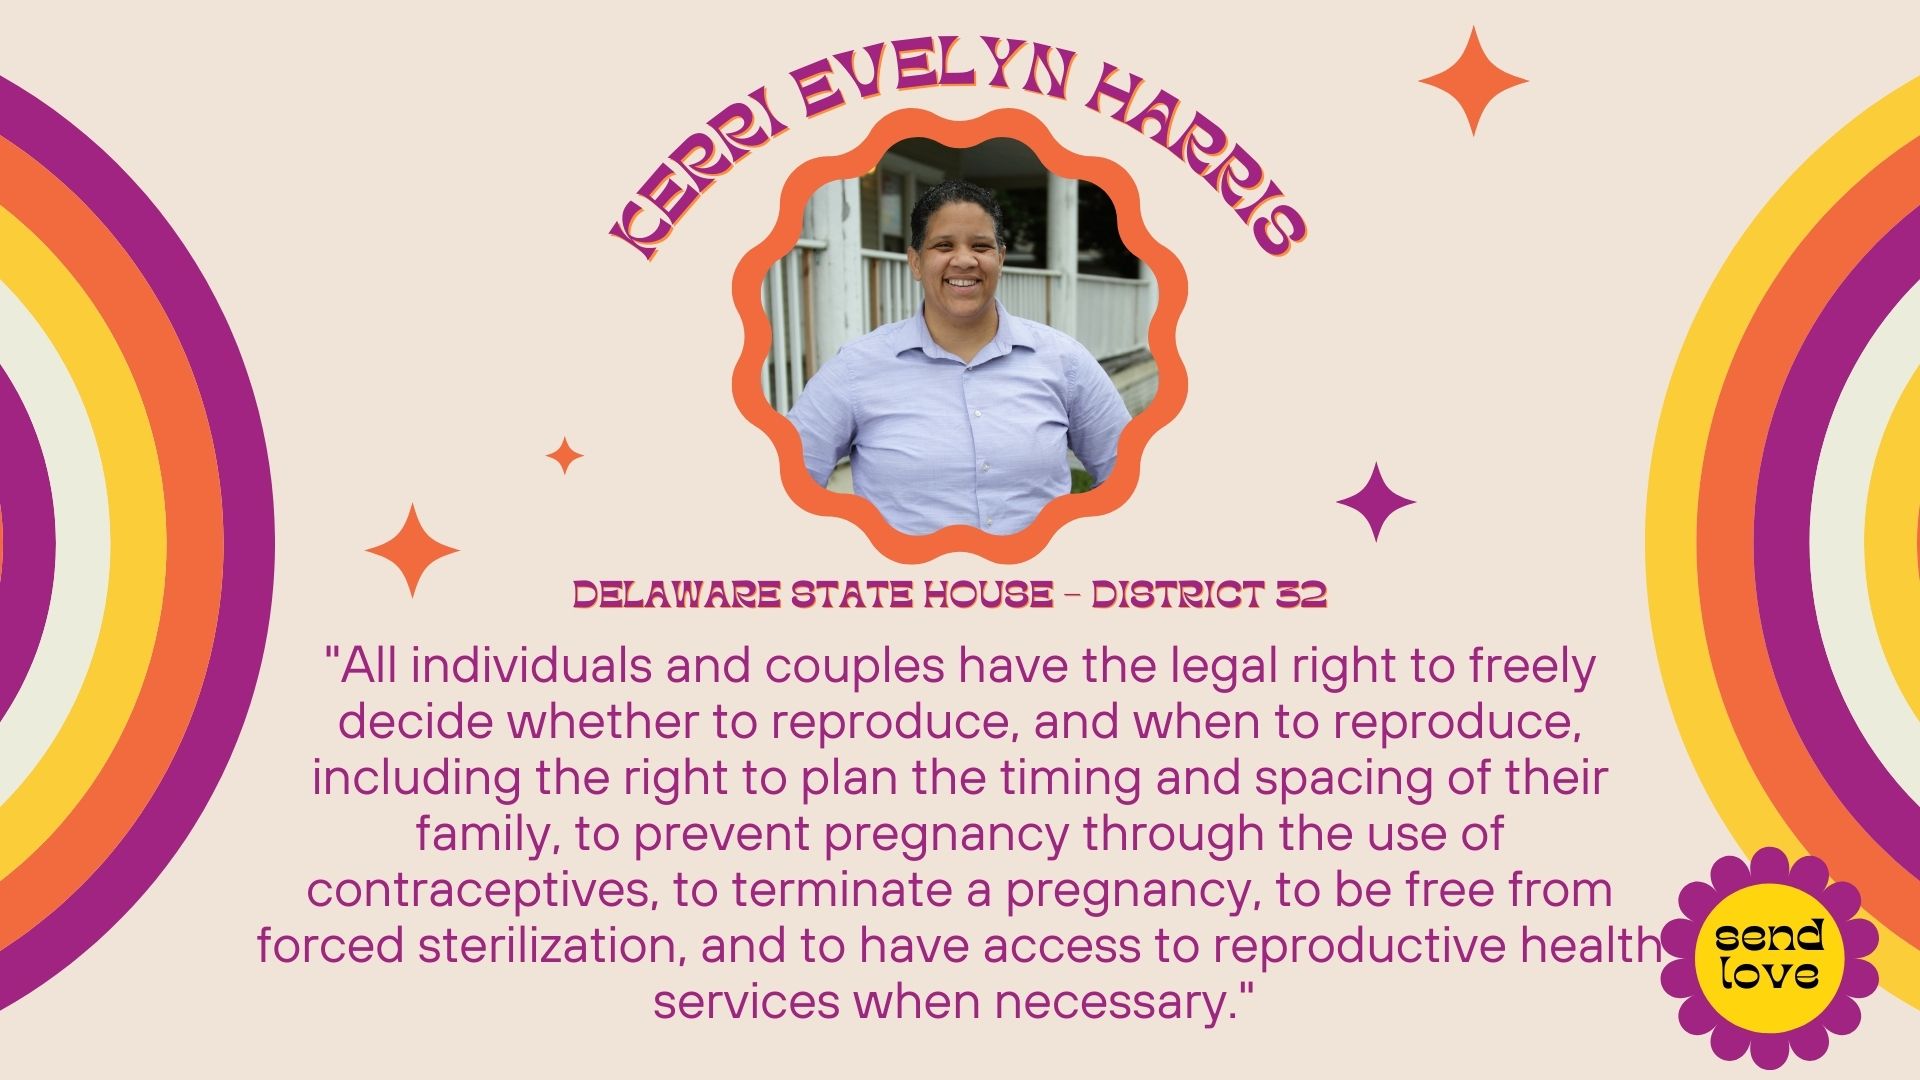 Kerri Evelyn Harris: Delaware State House - District 32. All individuals and couples have the legal right to freely decide whether to reproduce, when to reproduce, and how best to maintain their sexual and reproductive health. This includes the right to plan the timing and spacing of their family, to prevent pregnancy through the use of contraceptives, to be fully educated about their sexual and reproductive health, to terminate a pregnancy, to be free from forced sterilization, and to have access to reproductive health services when necessary. Both nationally and at the state and local level I have been a consistent advocate for reproductive freedoms. Recently, I was arrested in DC as a result of my participation in an act of civil disobedience in protest to the Supreme Court case overturning Roe. In addition, I am founding board member of the First State Abortion Fund which was founded after the Supreme Court case.